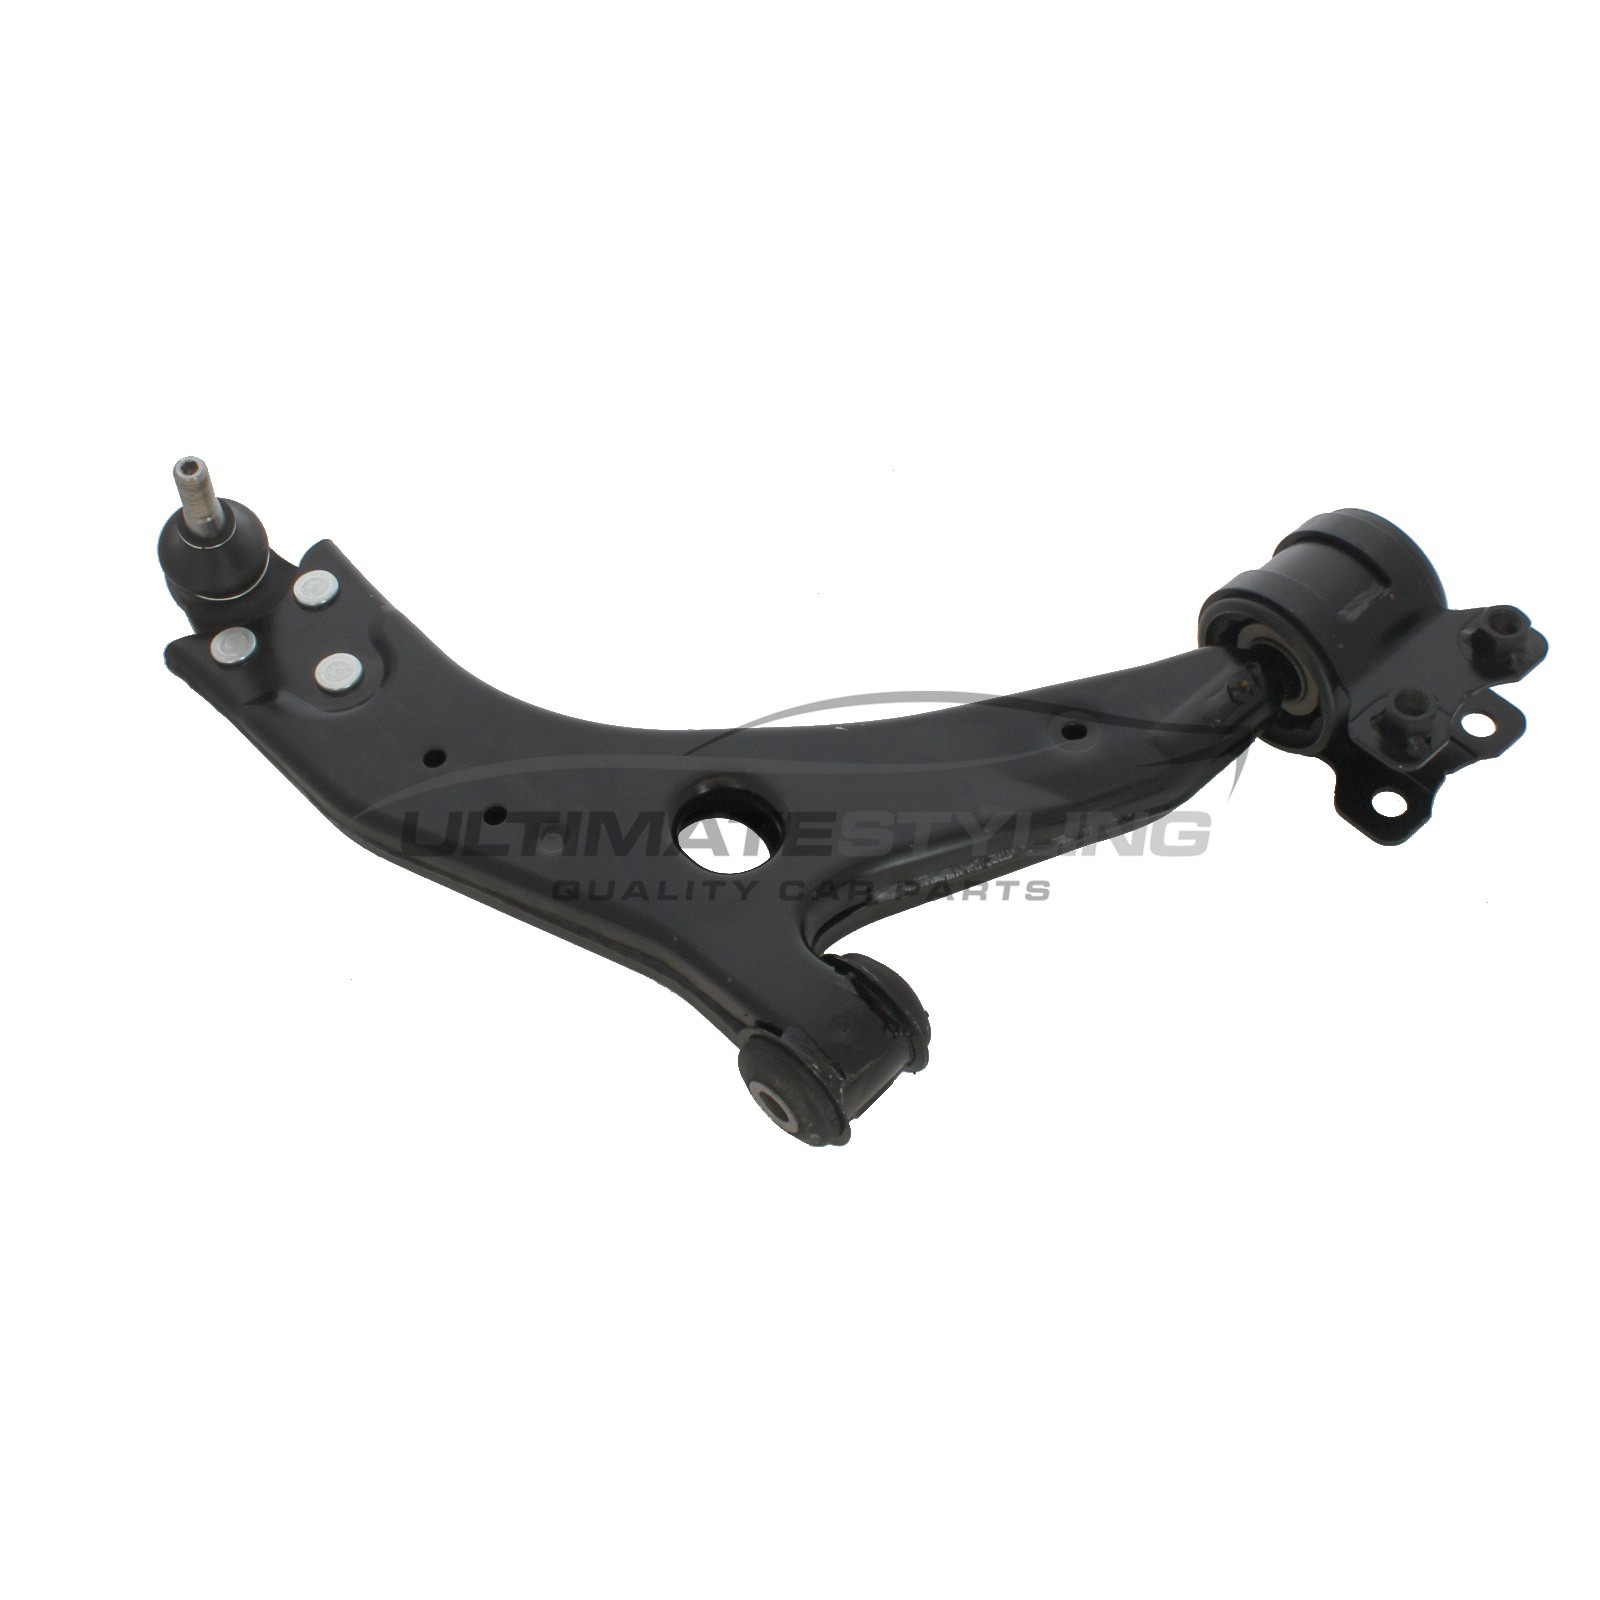 Ford C-MAX 2007-2009, Ford Focus 2003-2012, Volvo C30 2006-2012, Volvo C70 2006-2014, Volvo S40 2004-2012, Volvo V50 2004-2012 Front Lower Suspension Arm (Steel) Including 18mm Ball Joint and Rear Bush Driver Side (RH)